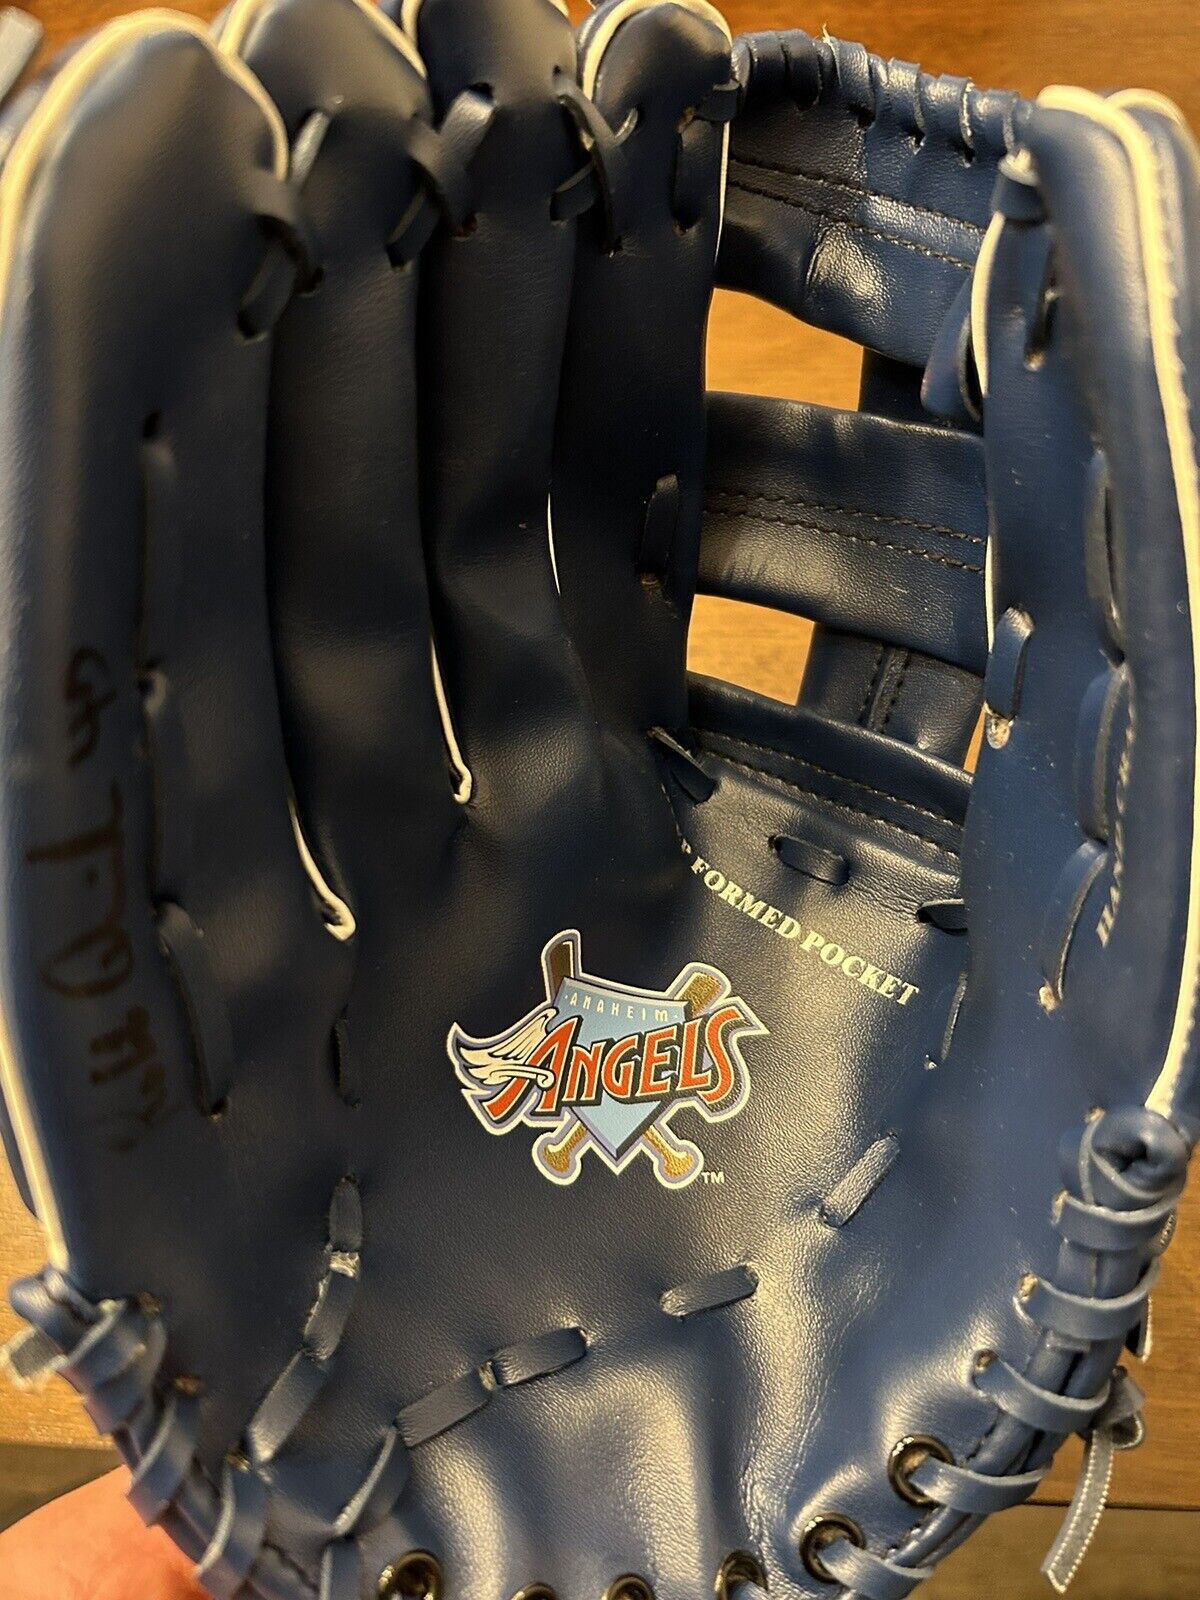 Anaheim Angels Signed/Autographed Glove - 2002Spring training (6 Signatures)